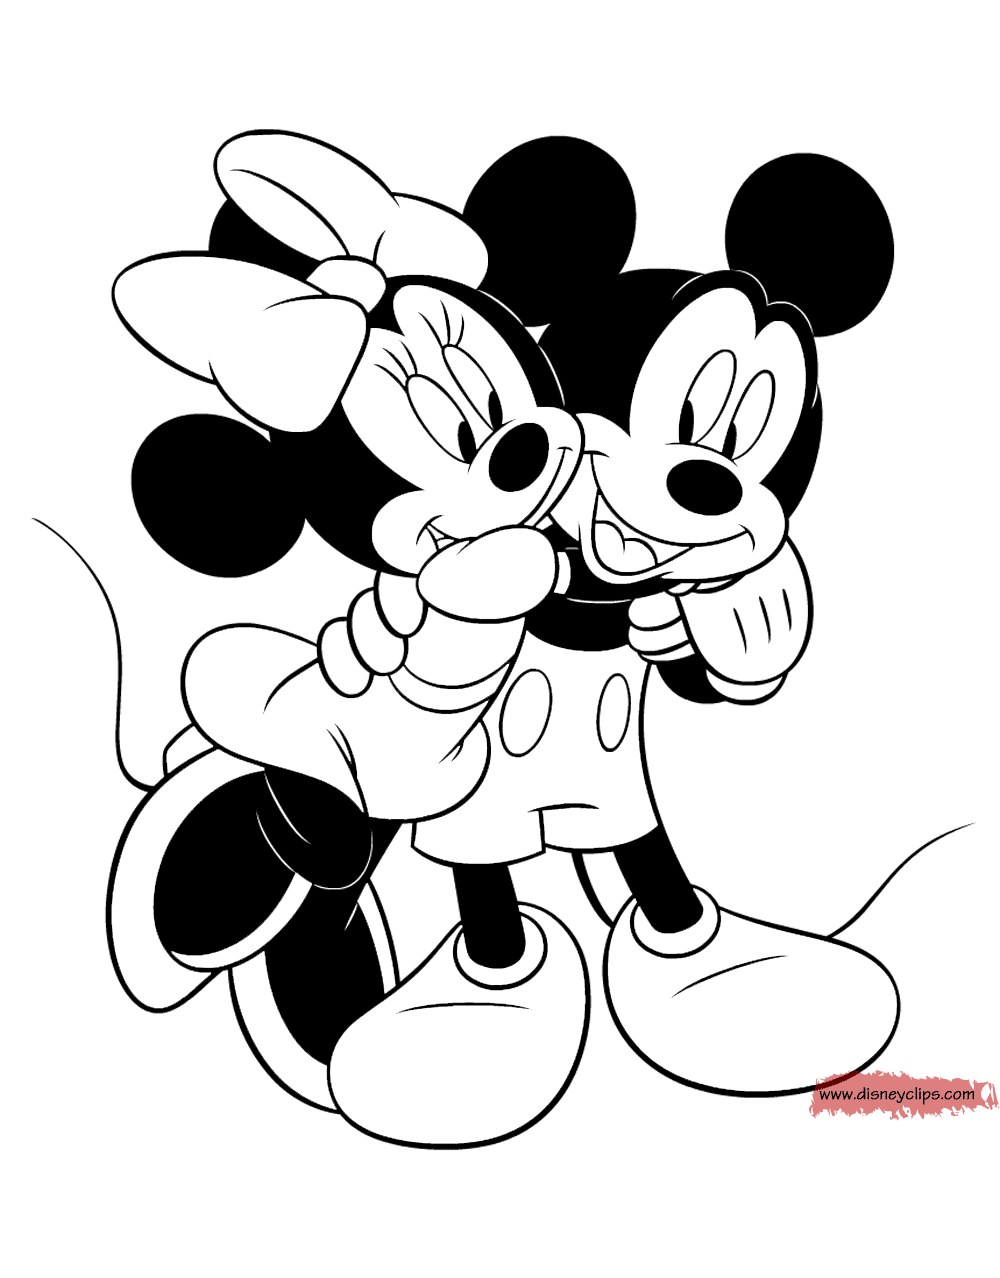 Mickey Mouse & Friends Coloring Pages 2 | Disney's World of Wonders